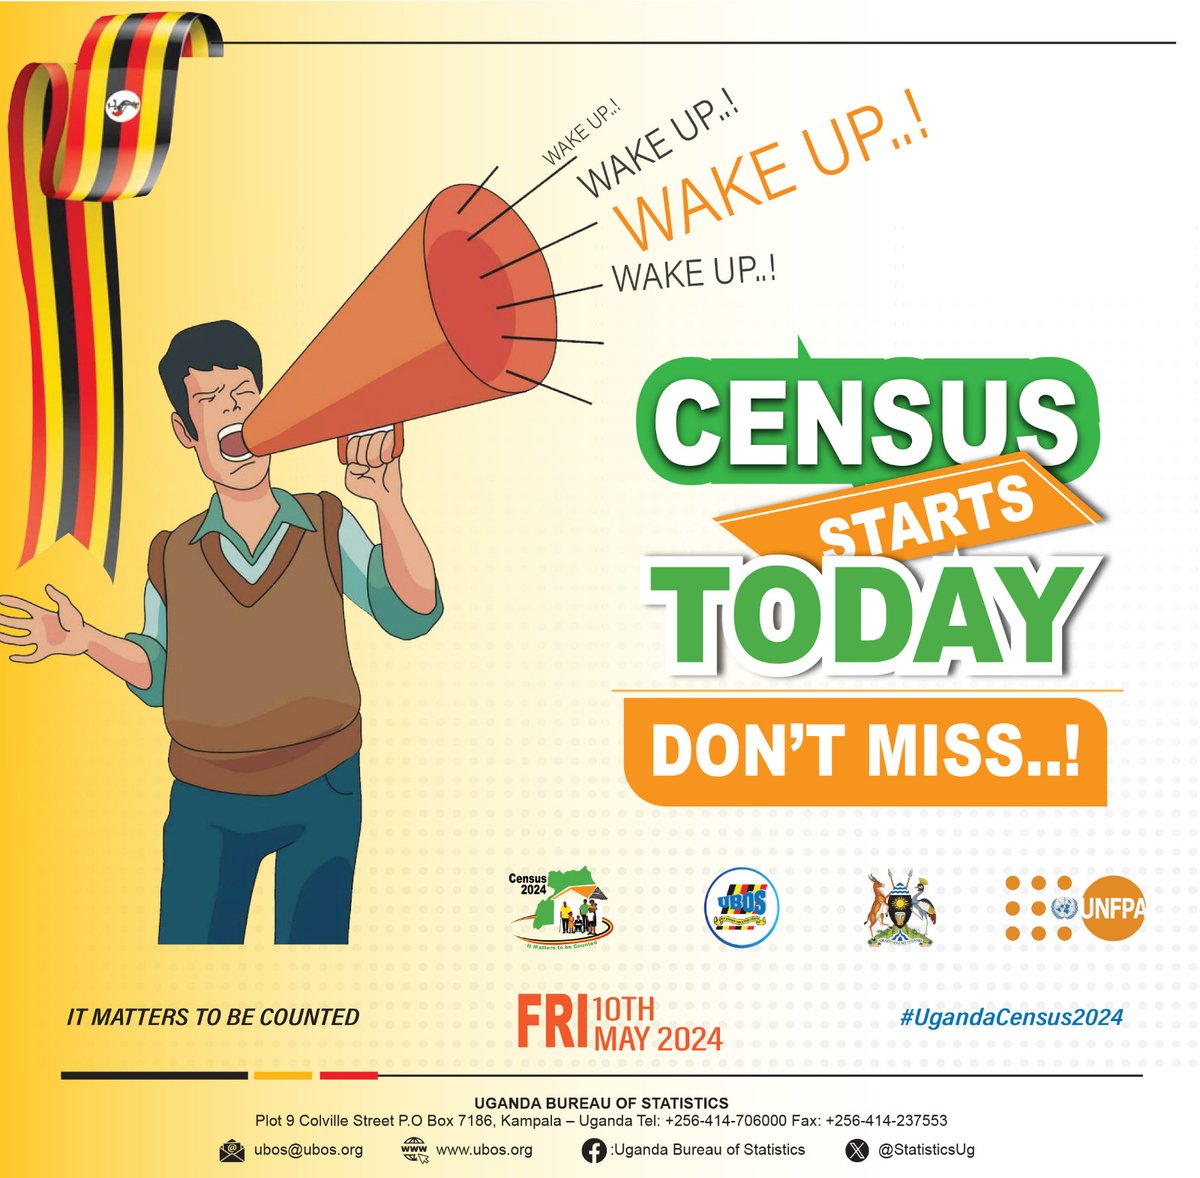 📢Good morning Uganda! 🇺🇬 It's time to rise to the occasion. Today is the day we've all been waiting for - the Census day. It's important to stay in your homes and engage in the census process. The Census is scheduled to take place from May 10th to 19th, 2024. #Ugandacensus2024